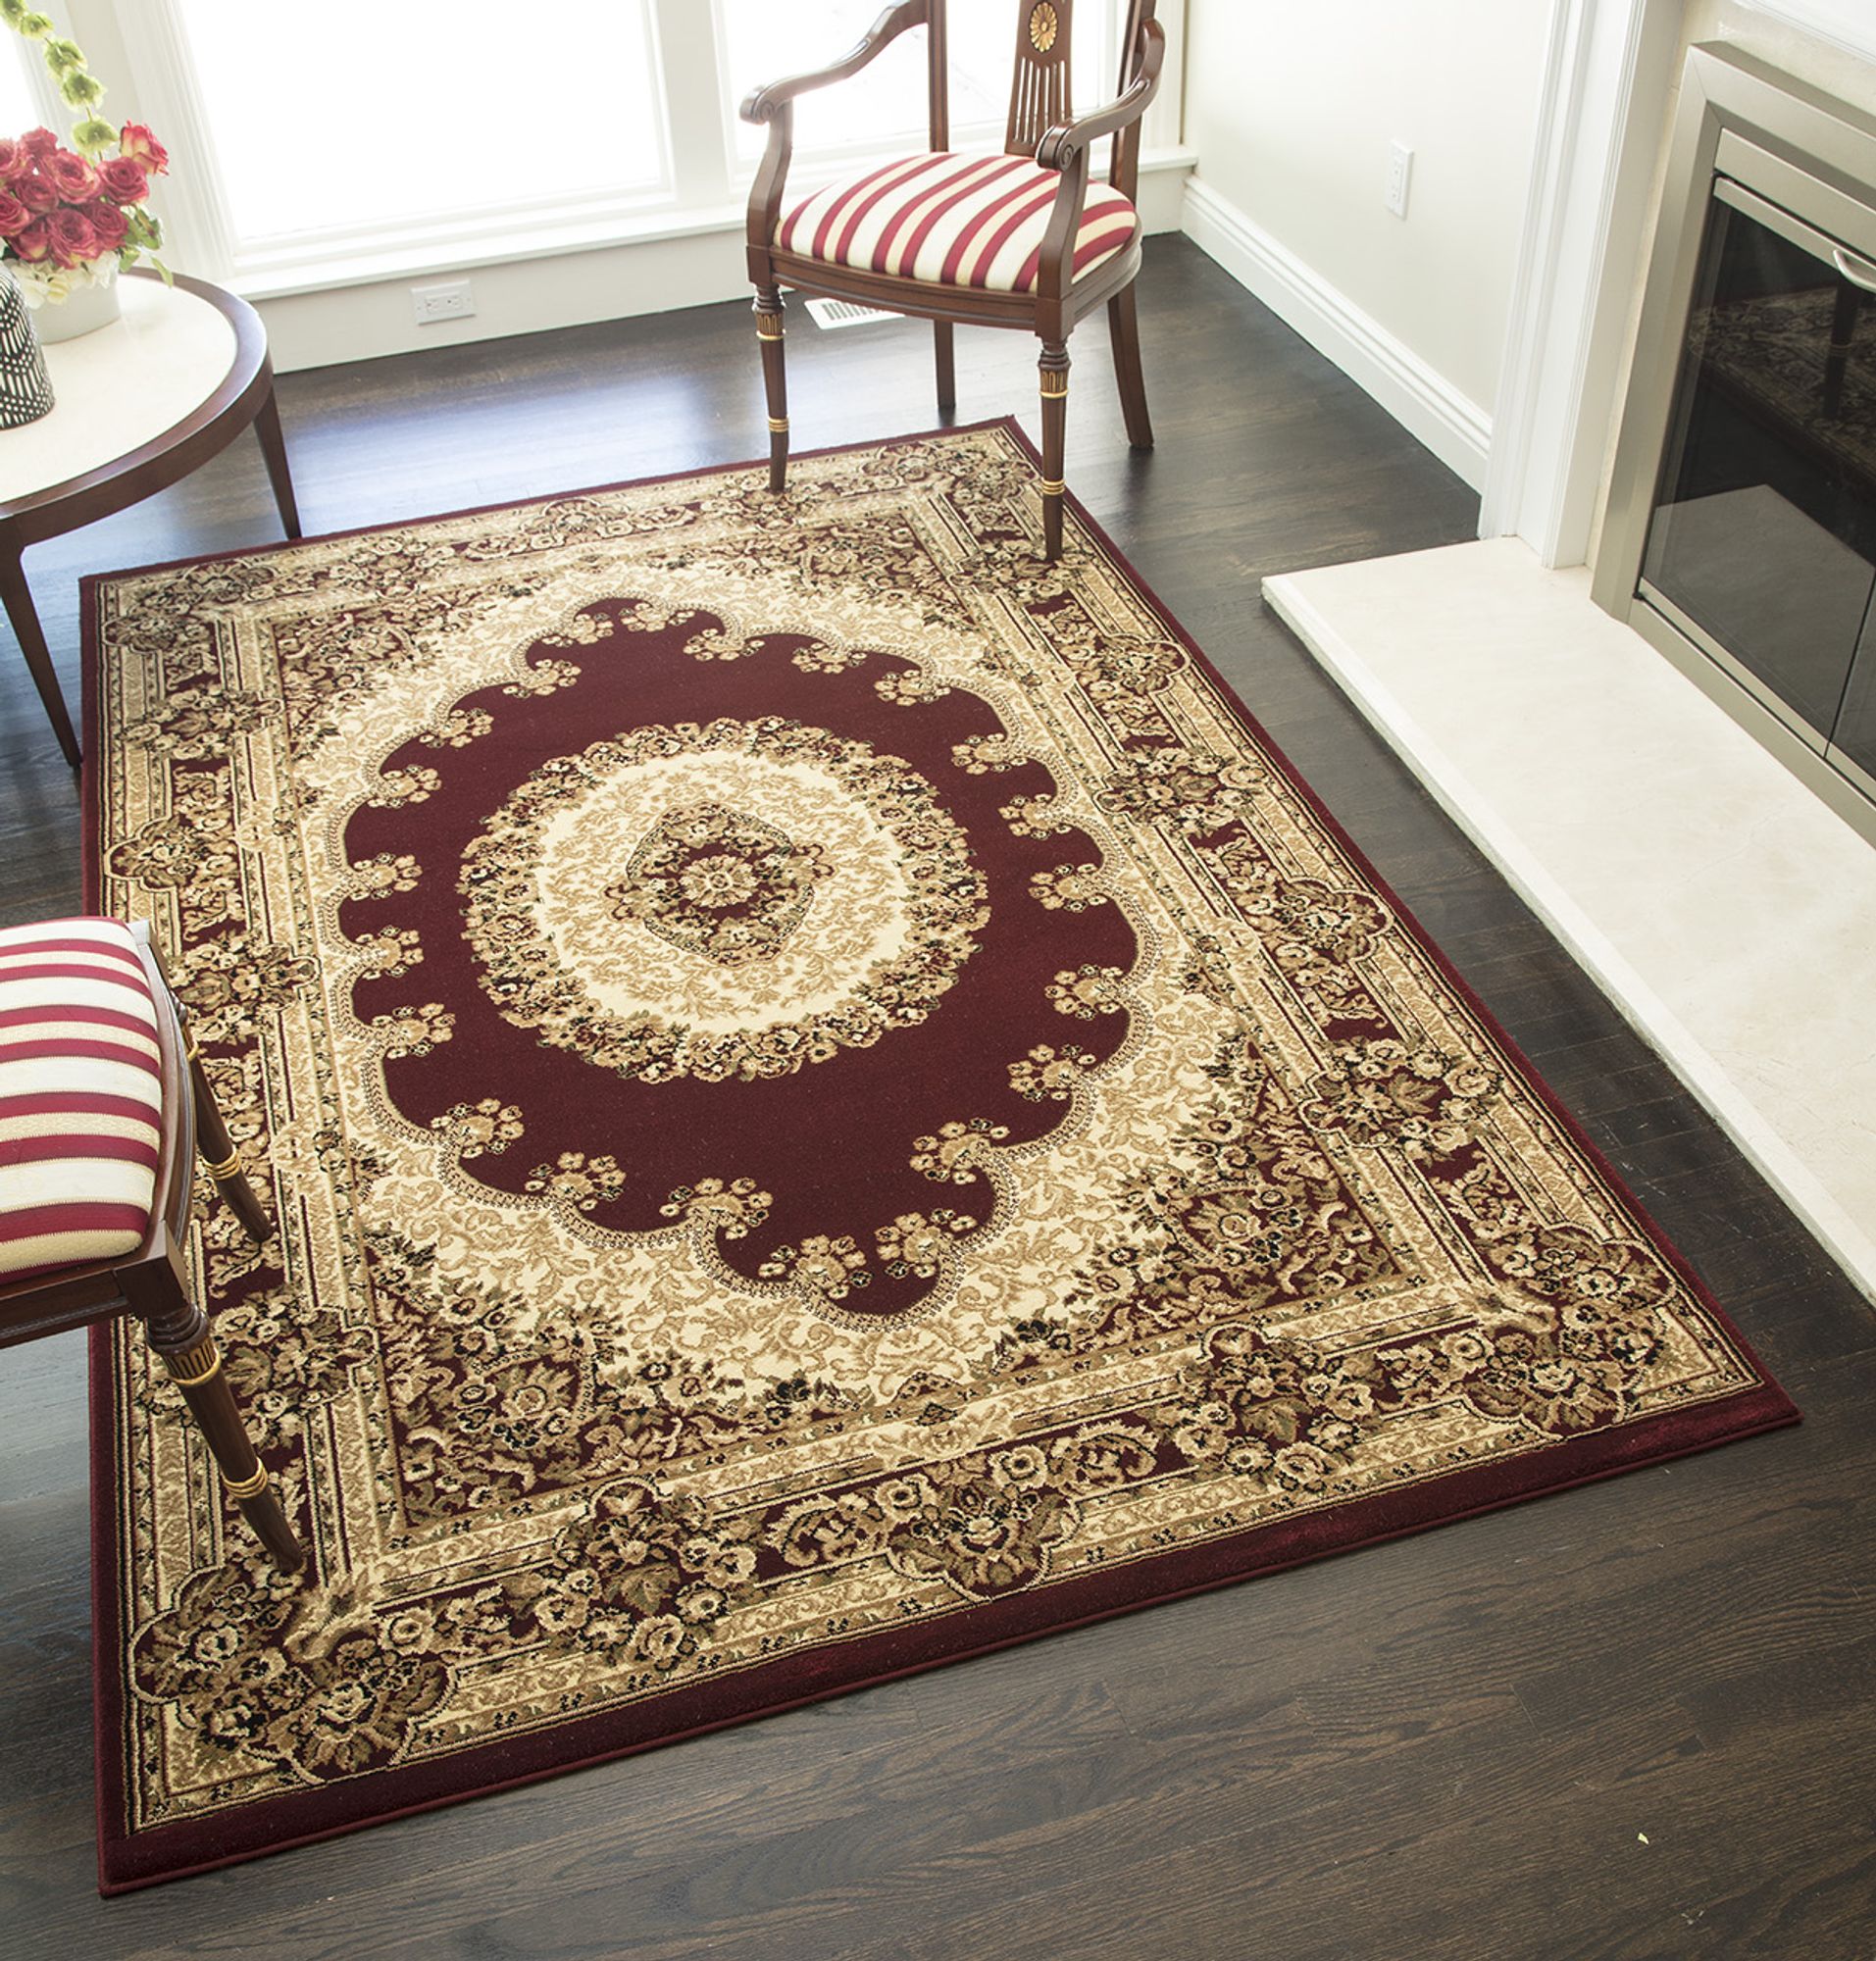 Rugs America Vista 807-RED Kerman Red Oriental Traditional Red Area Rug, 2'x2'11" - image 1 of 3